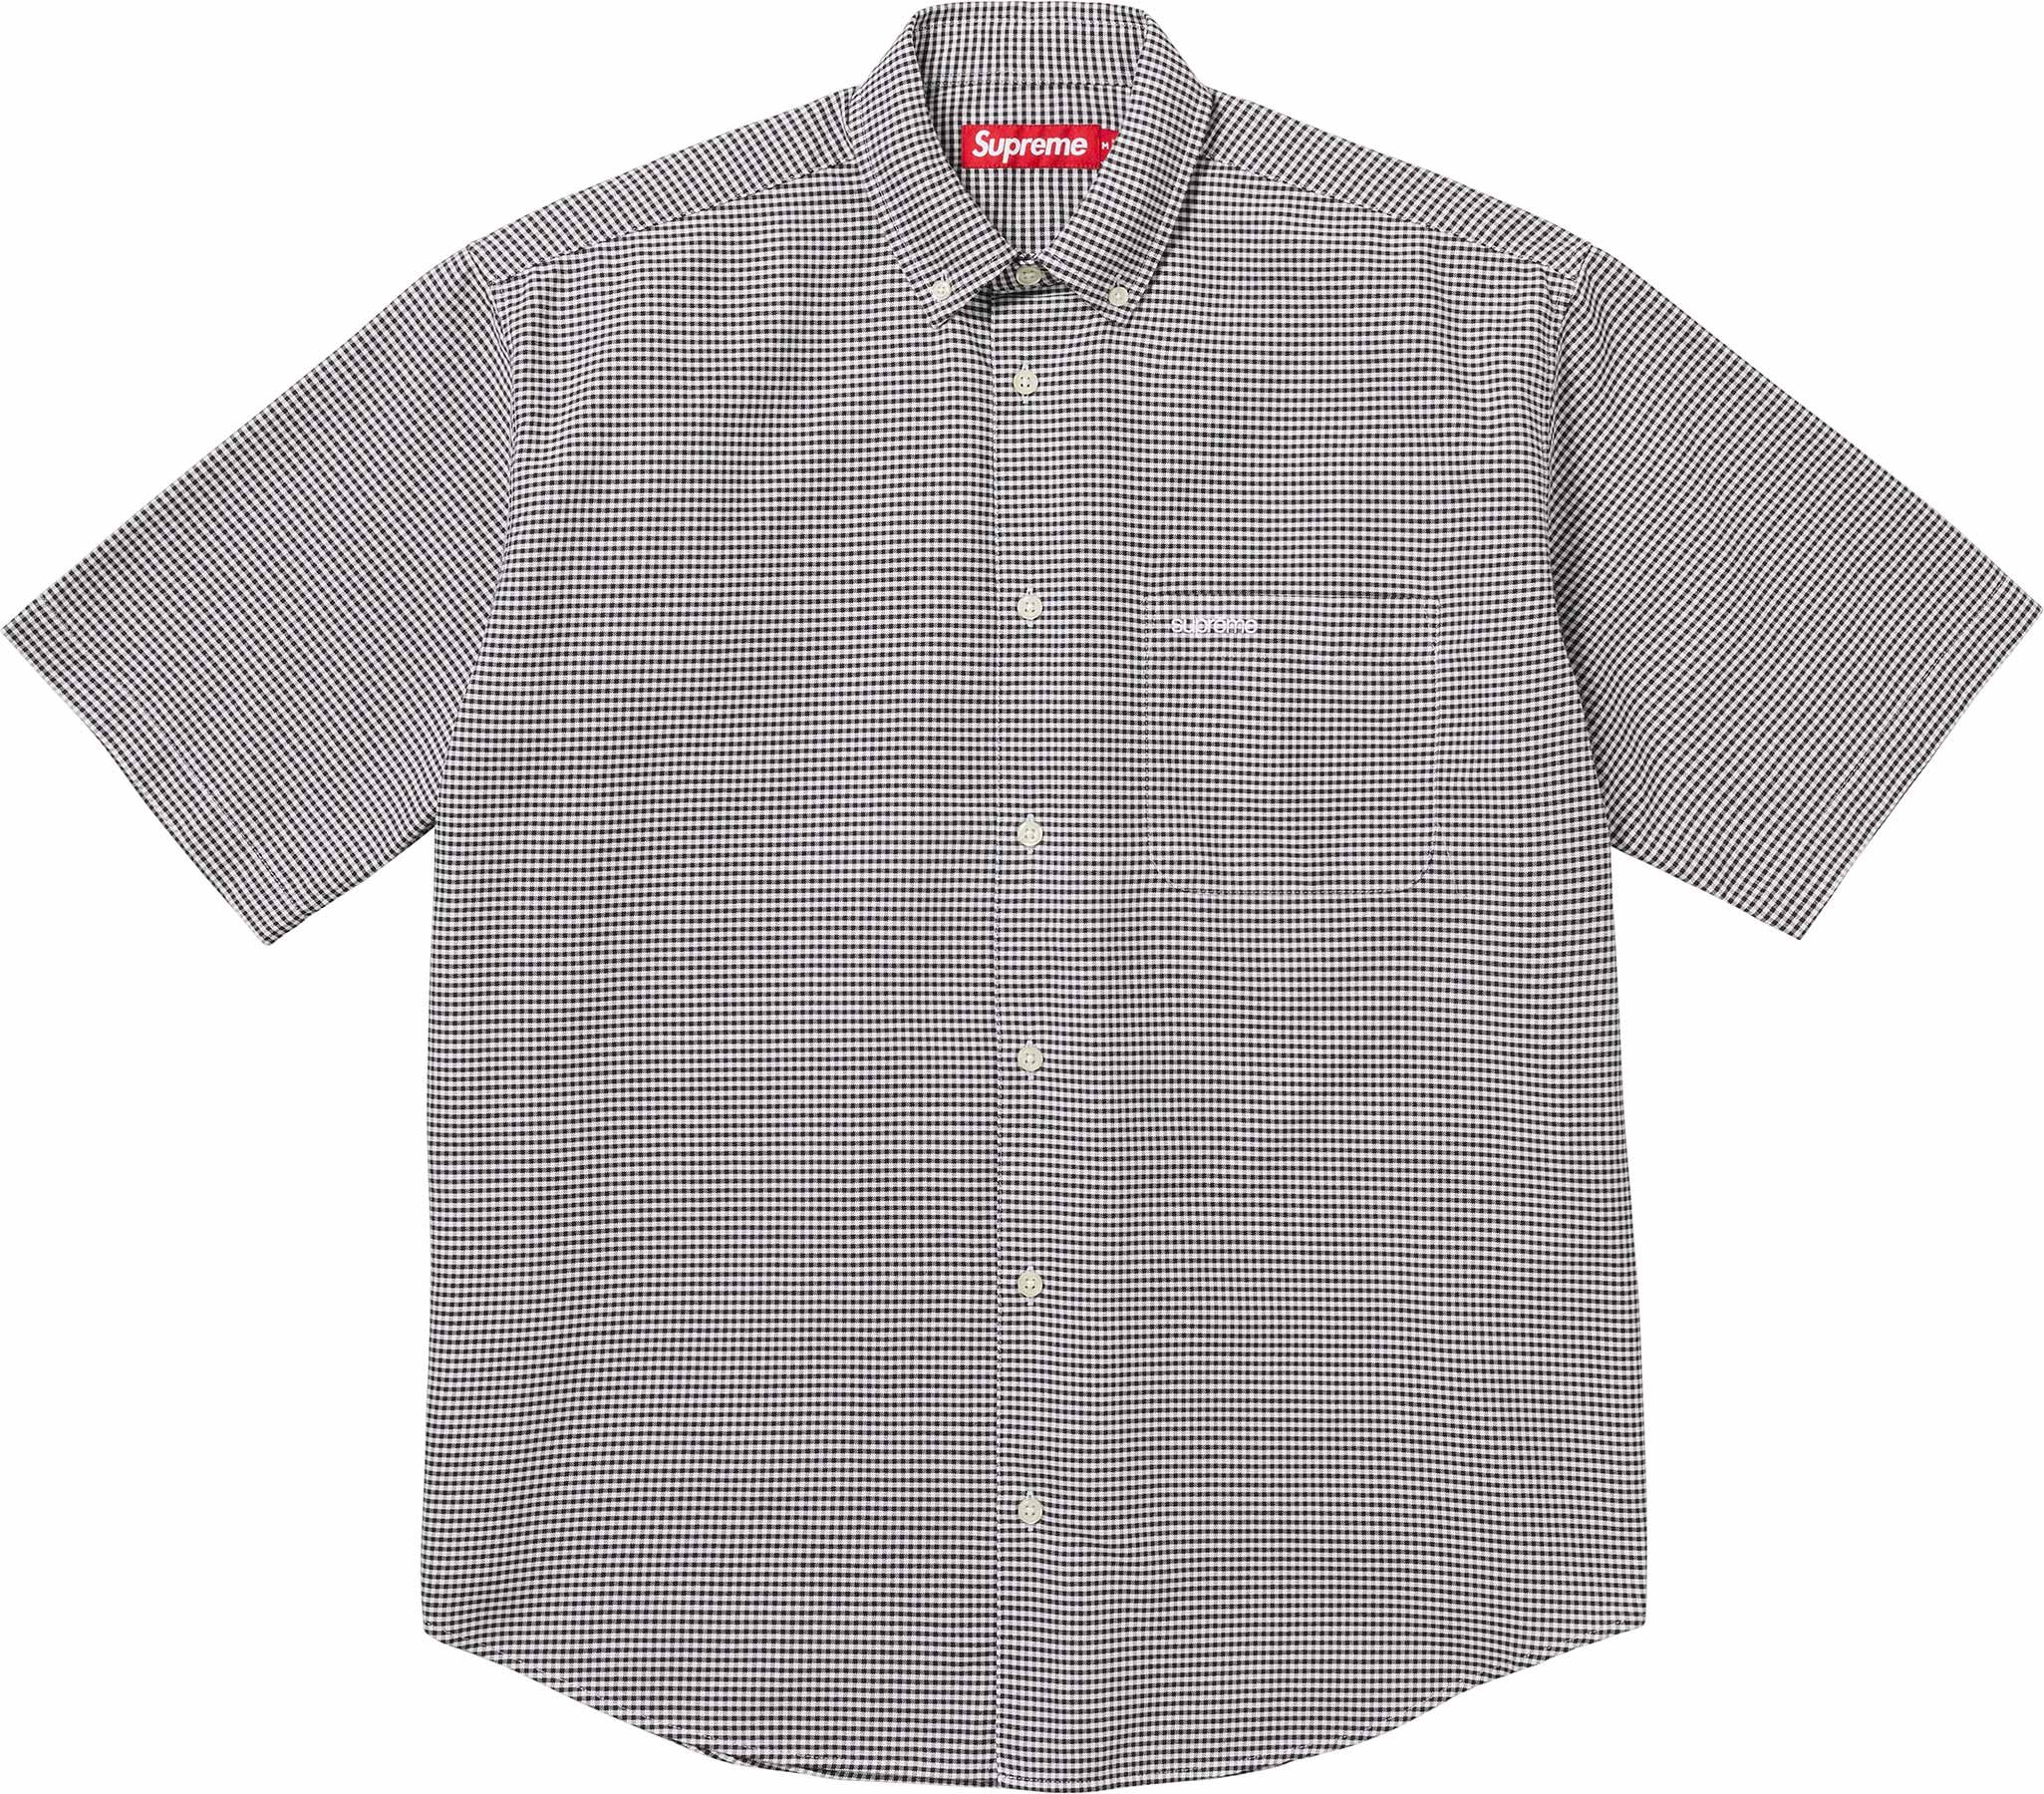 Supreme Loose Fit S/S Oxford Shirt SS24 White